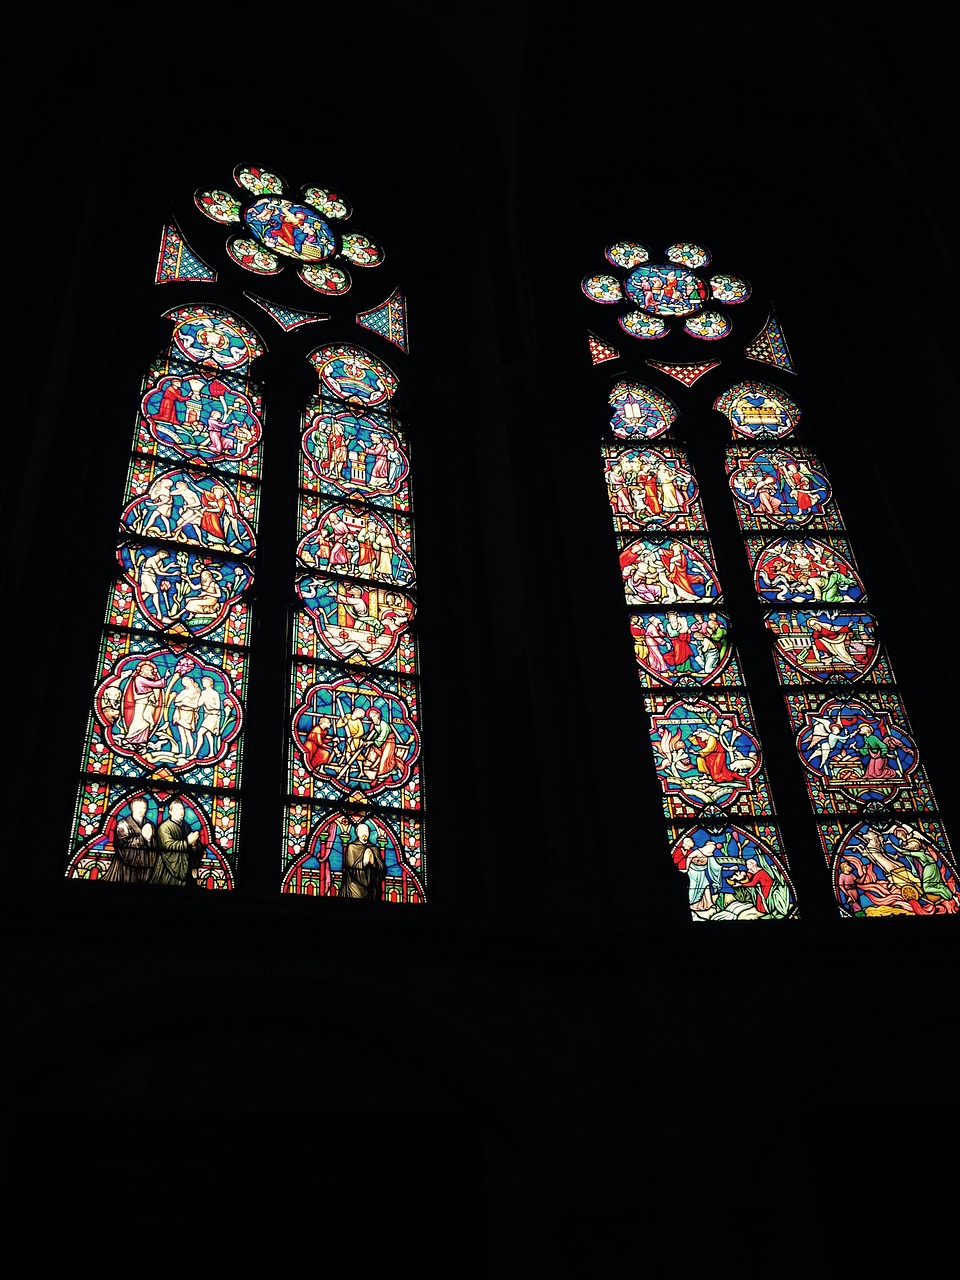 cathedral stained glass brussels free photo